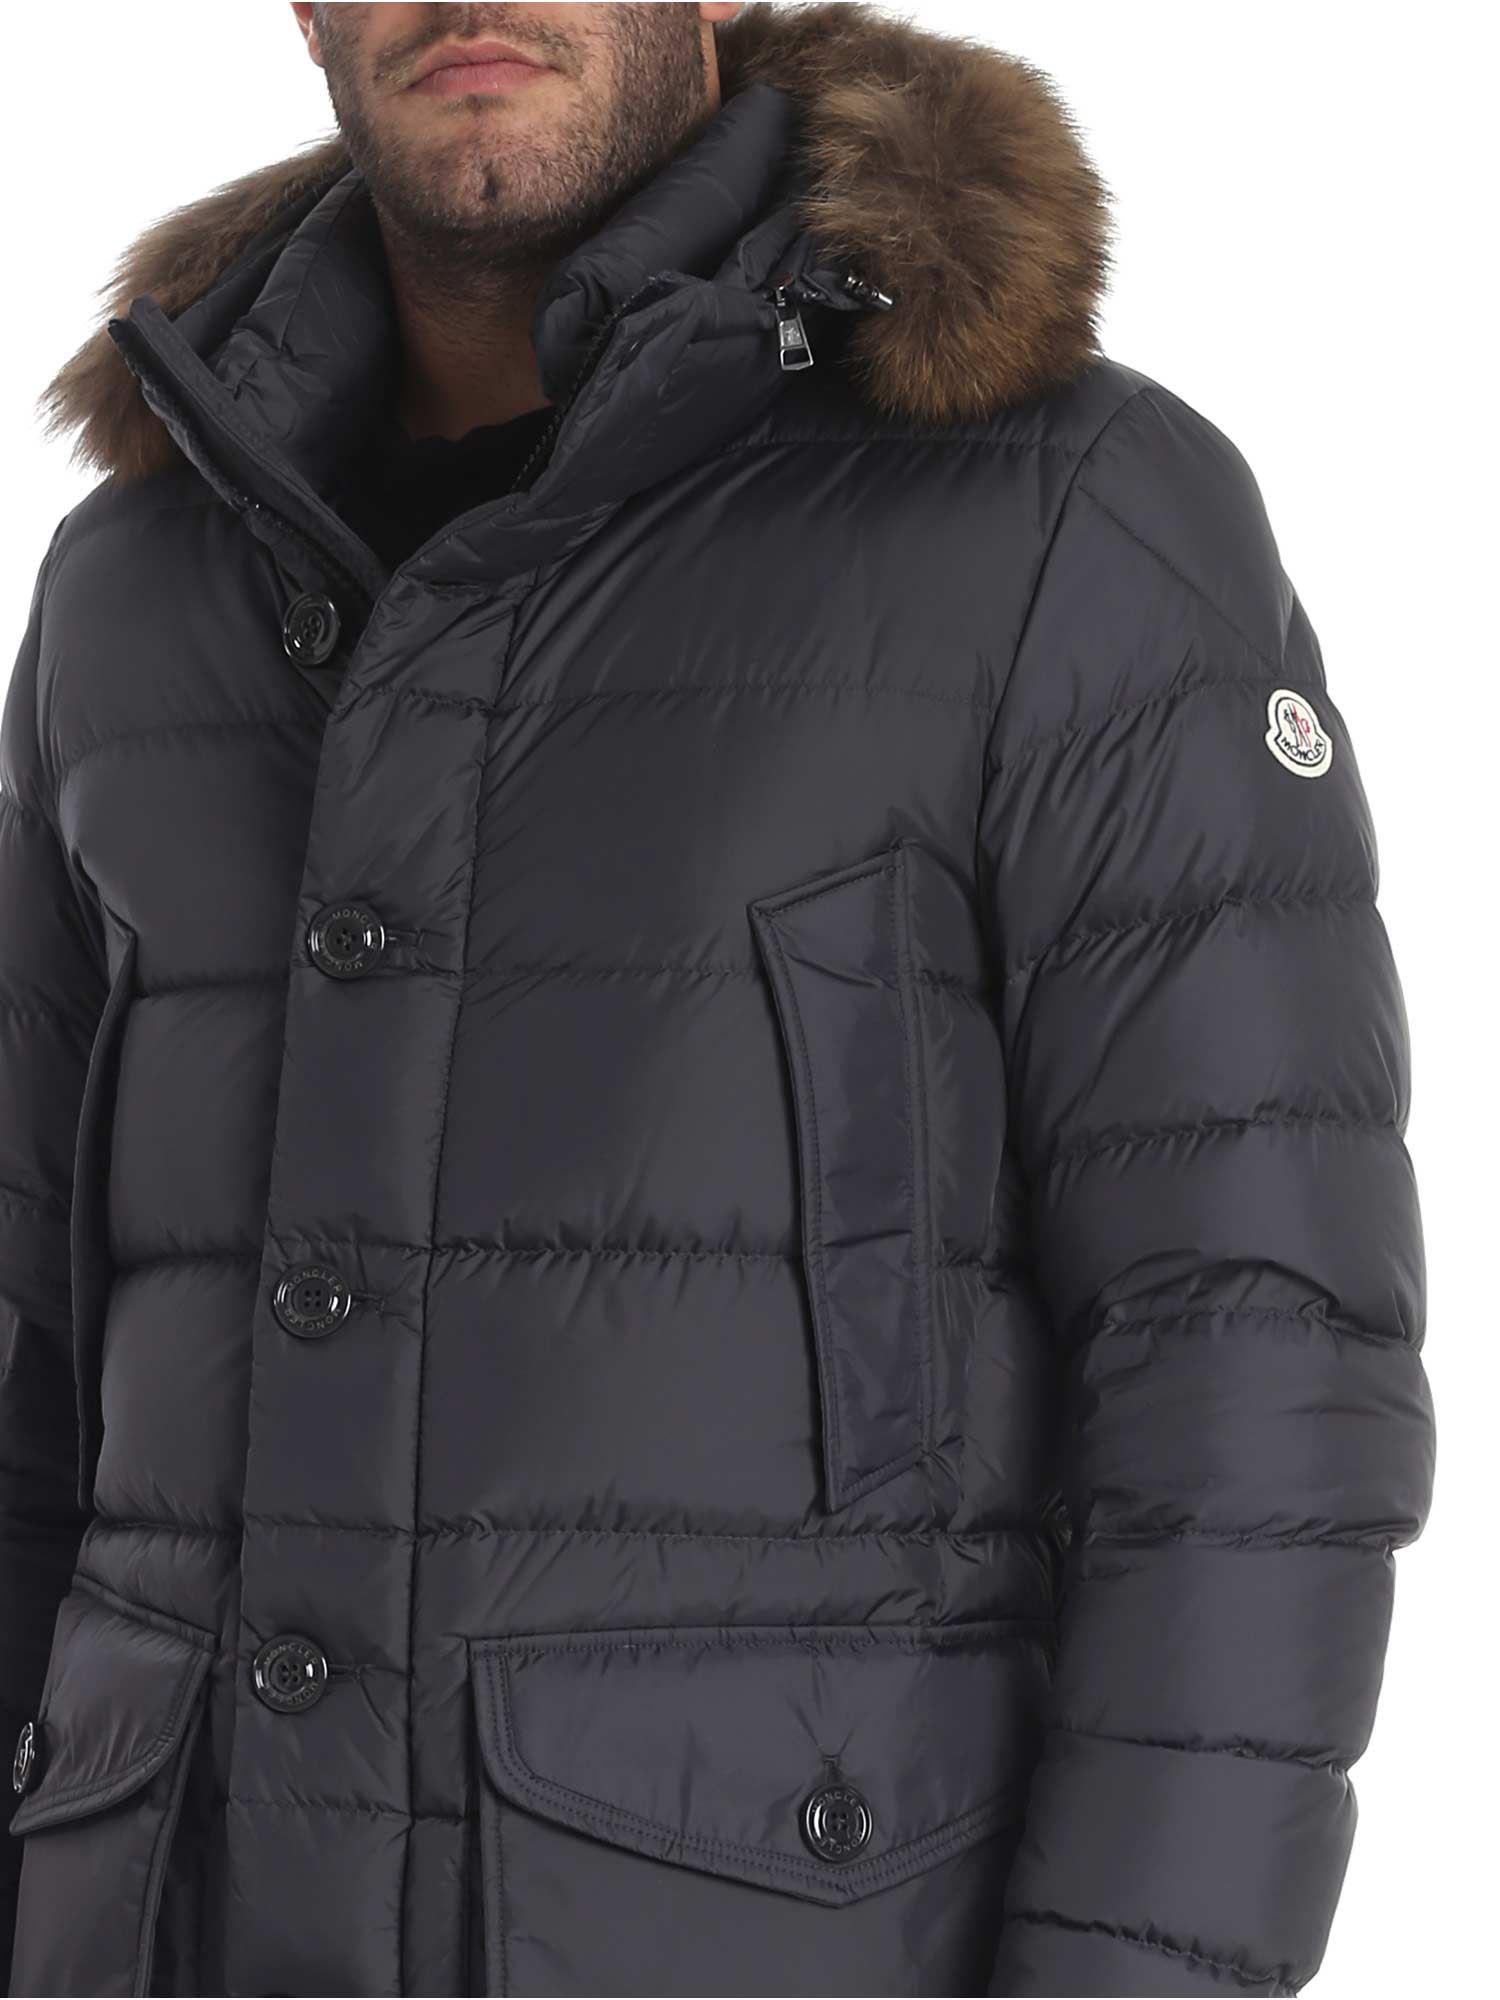 Moncler Synthetic Grey "cluny" Down Jacket in Gray for Men - Lyst